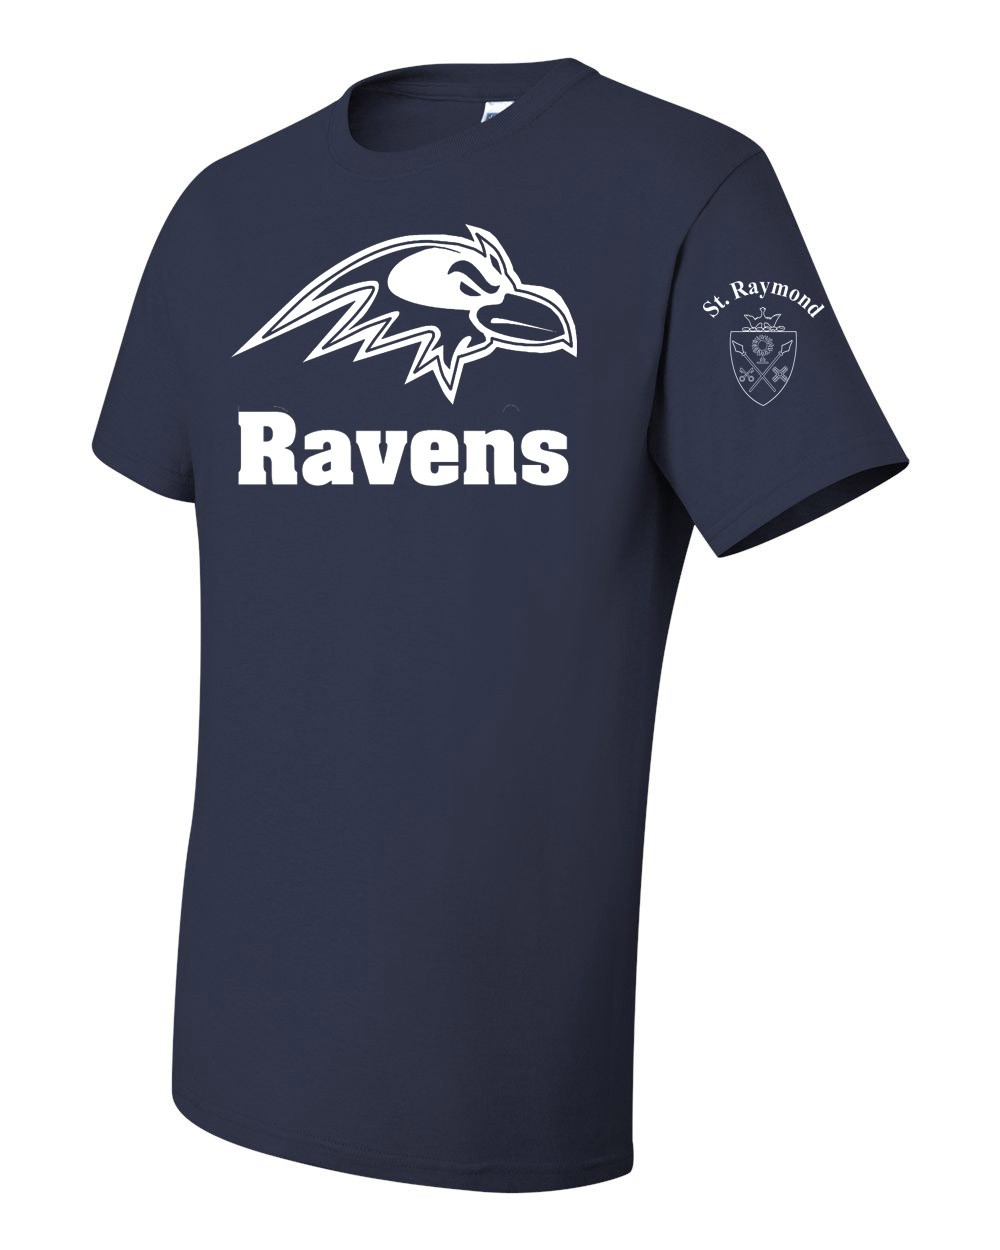 STAFF SRS S/S T-Shirt w/ Raven Logo - Please Allow 2-3 Weeks for Delivery